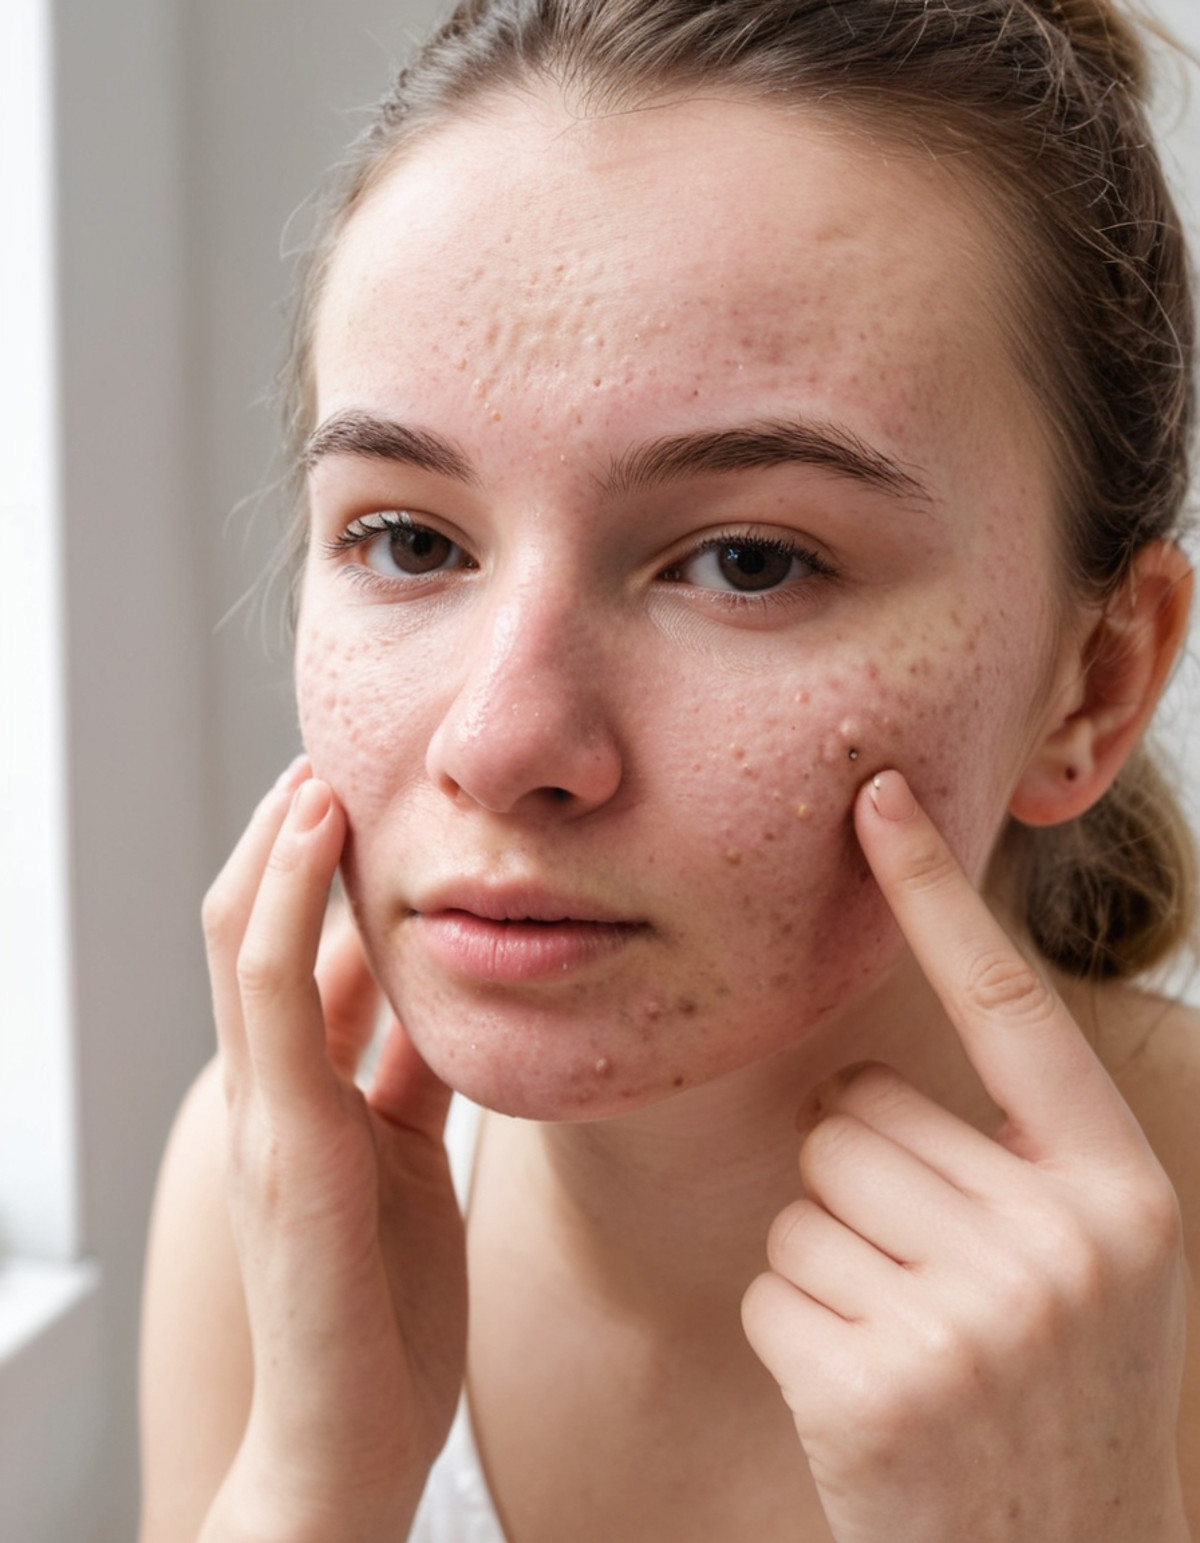 raw amateur photo of a femake person with acne checking her face, <lora:275FAB00CB:0.5> Detailed natural skin and blemishe...